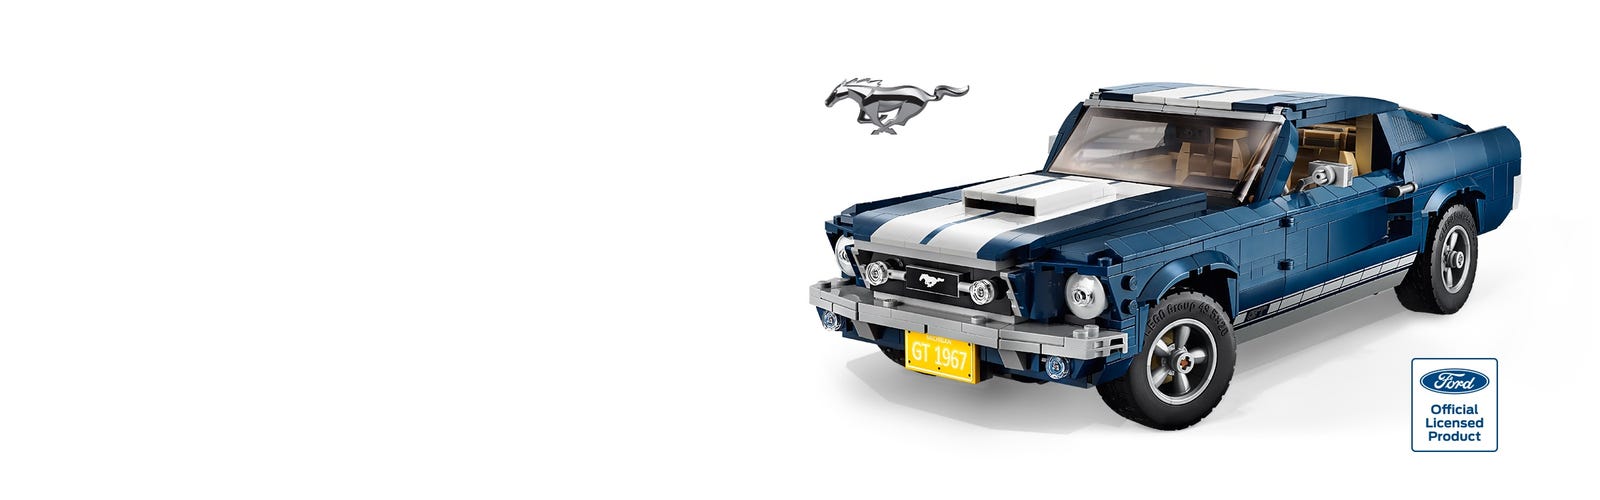 nice to meet you so much fiber Ford Mustang 10265 | Creator Expert | Buy online at the Official LEGO® Shop  US